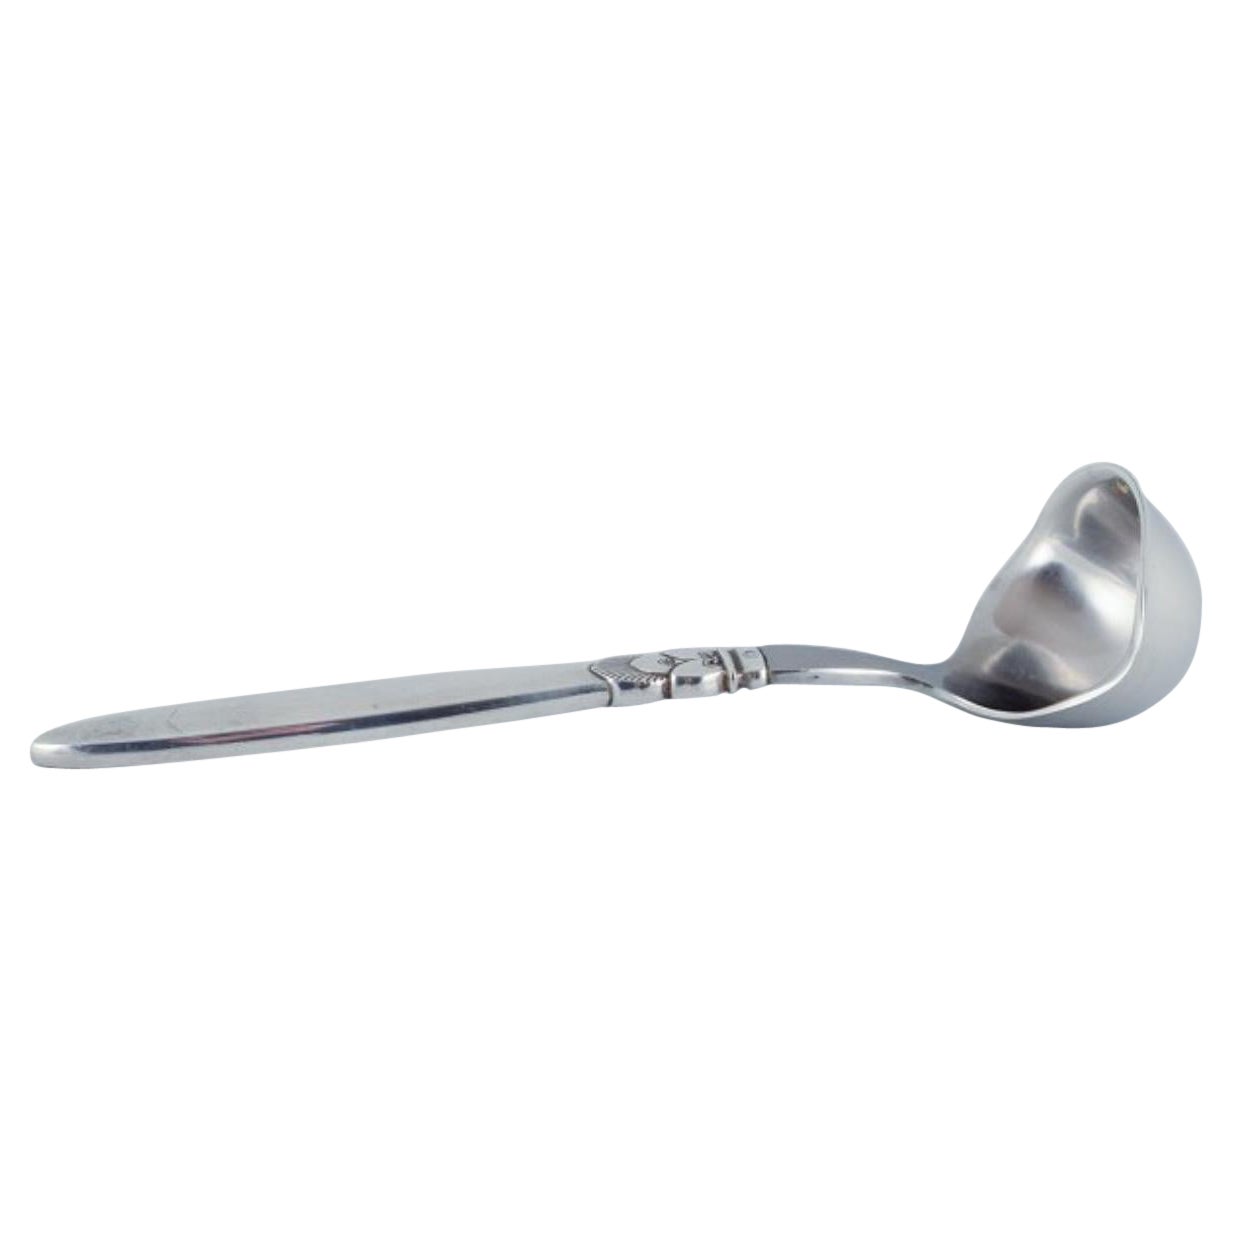 Georg Jensen, Cactus, sterling silver and stainless steel sauce spoon For Sale